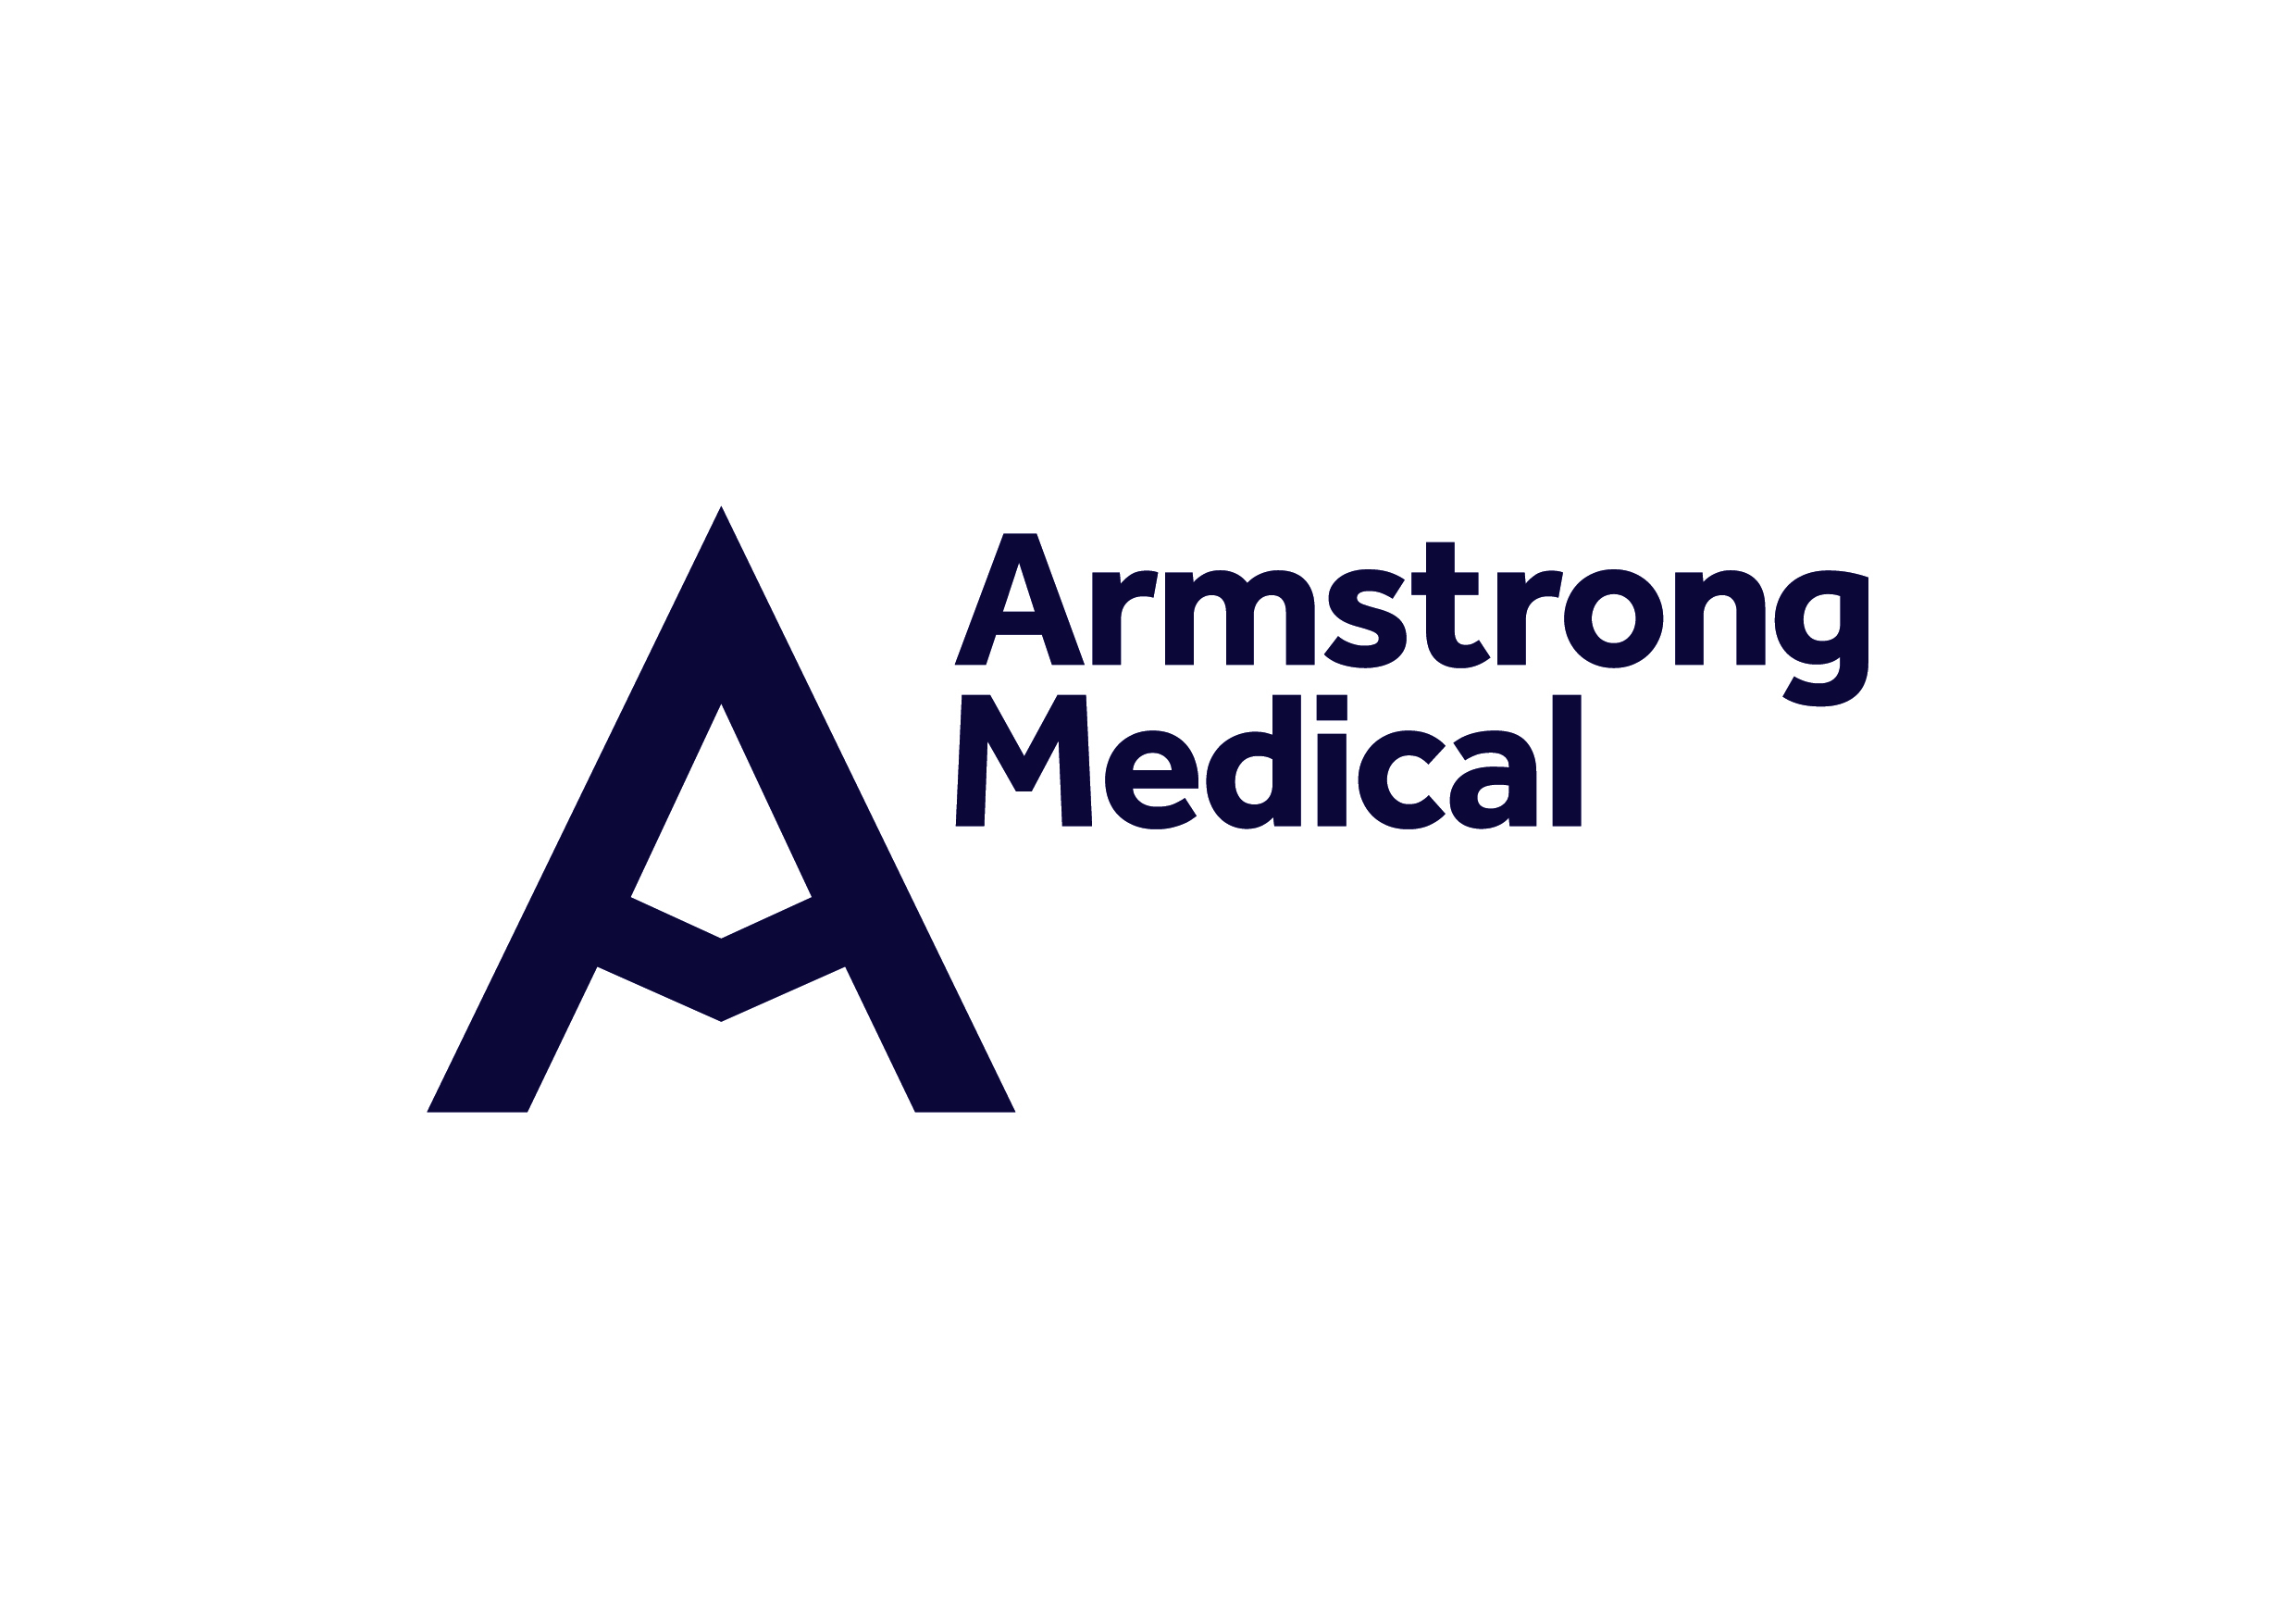 Armstrong Medical Limited